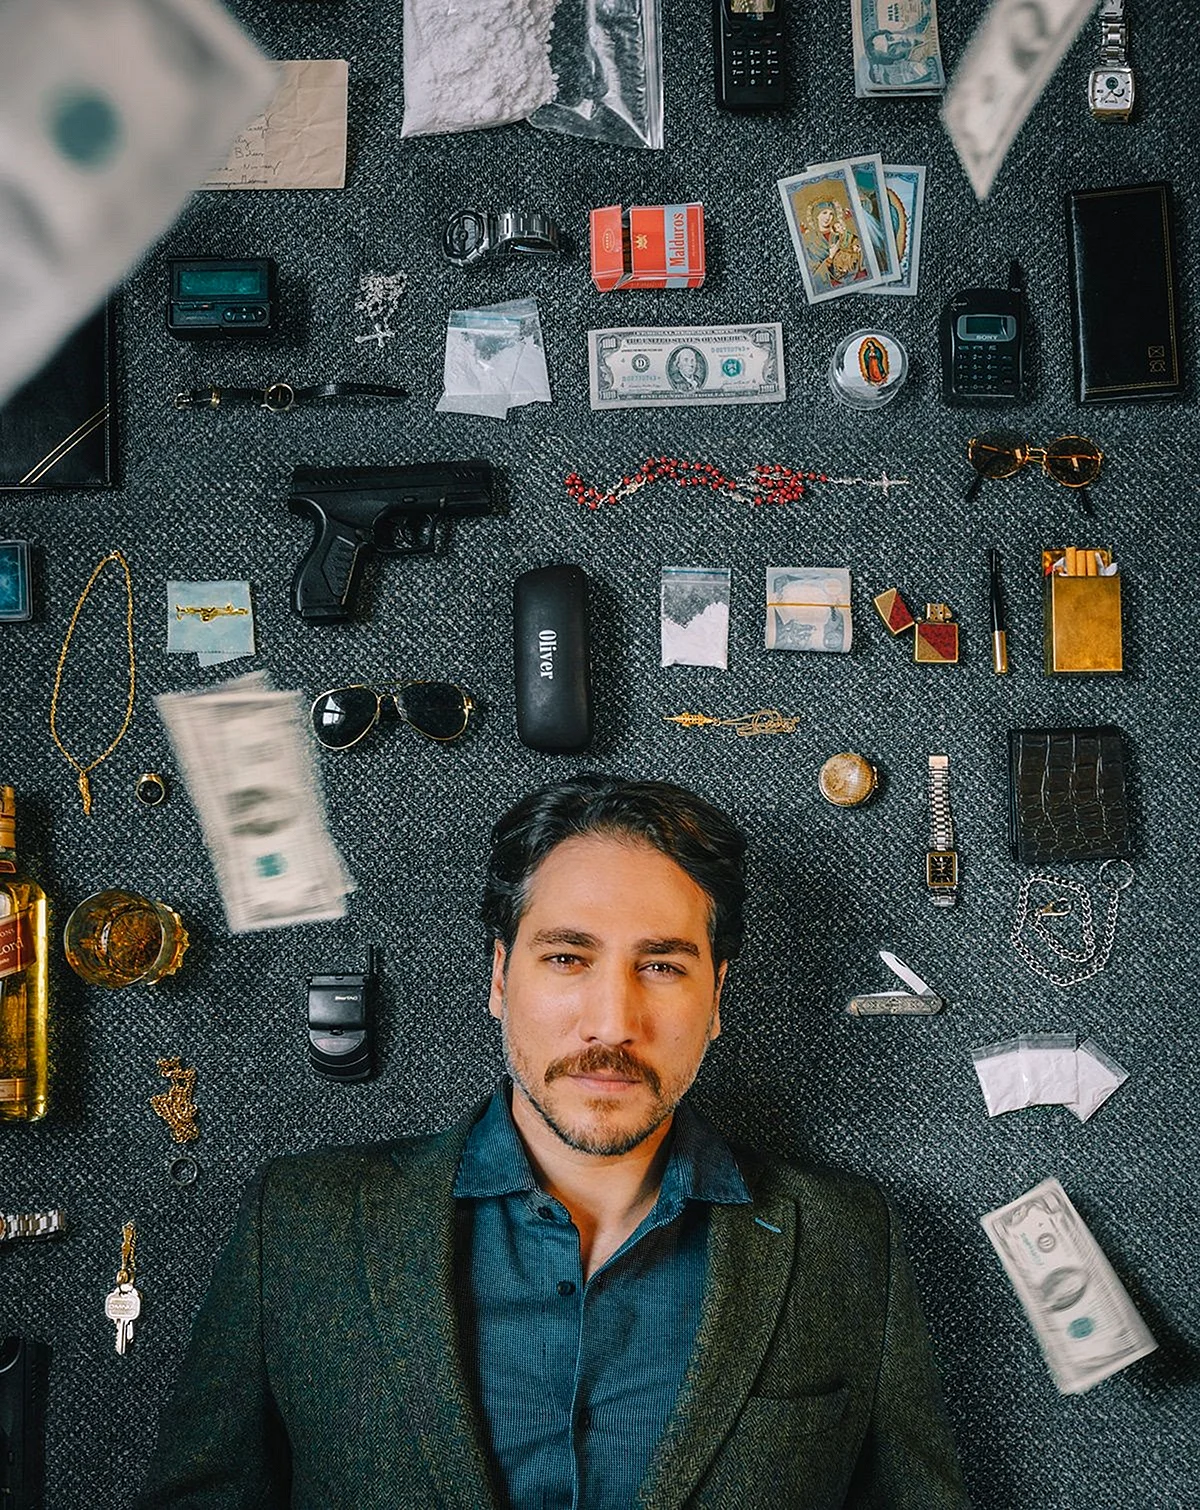 Narcos Wallpaper For iPhone